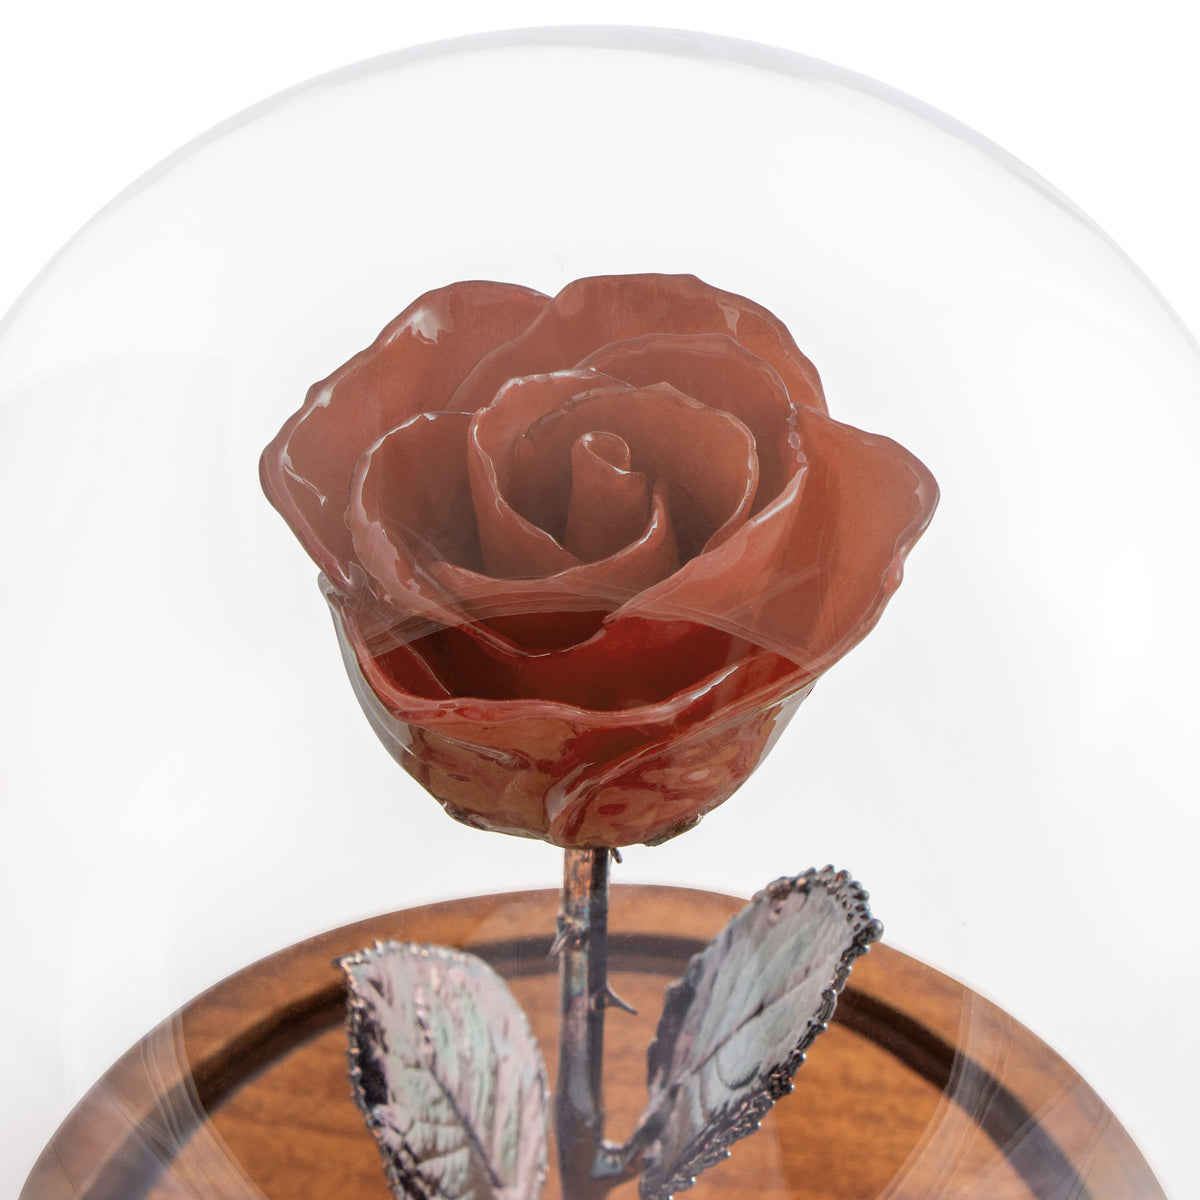 Pink Enchanted Rose (aka Beauty &amp; The Beast Rose) with Patina Copper Stem Mounted to A Hand Turned Solid Wood Base under a glass dome.